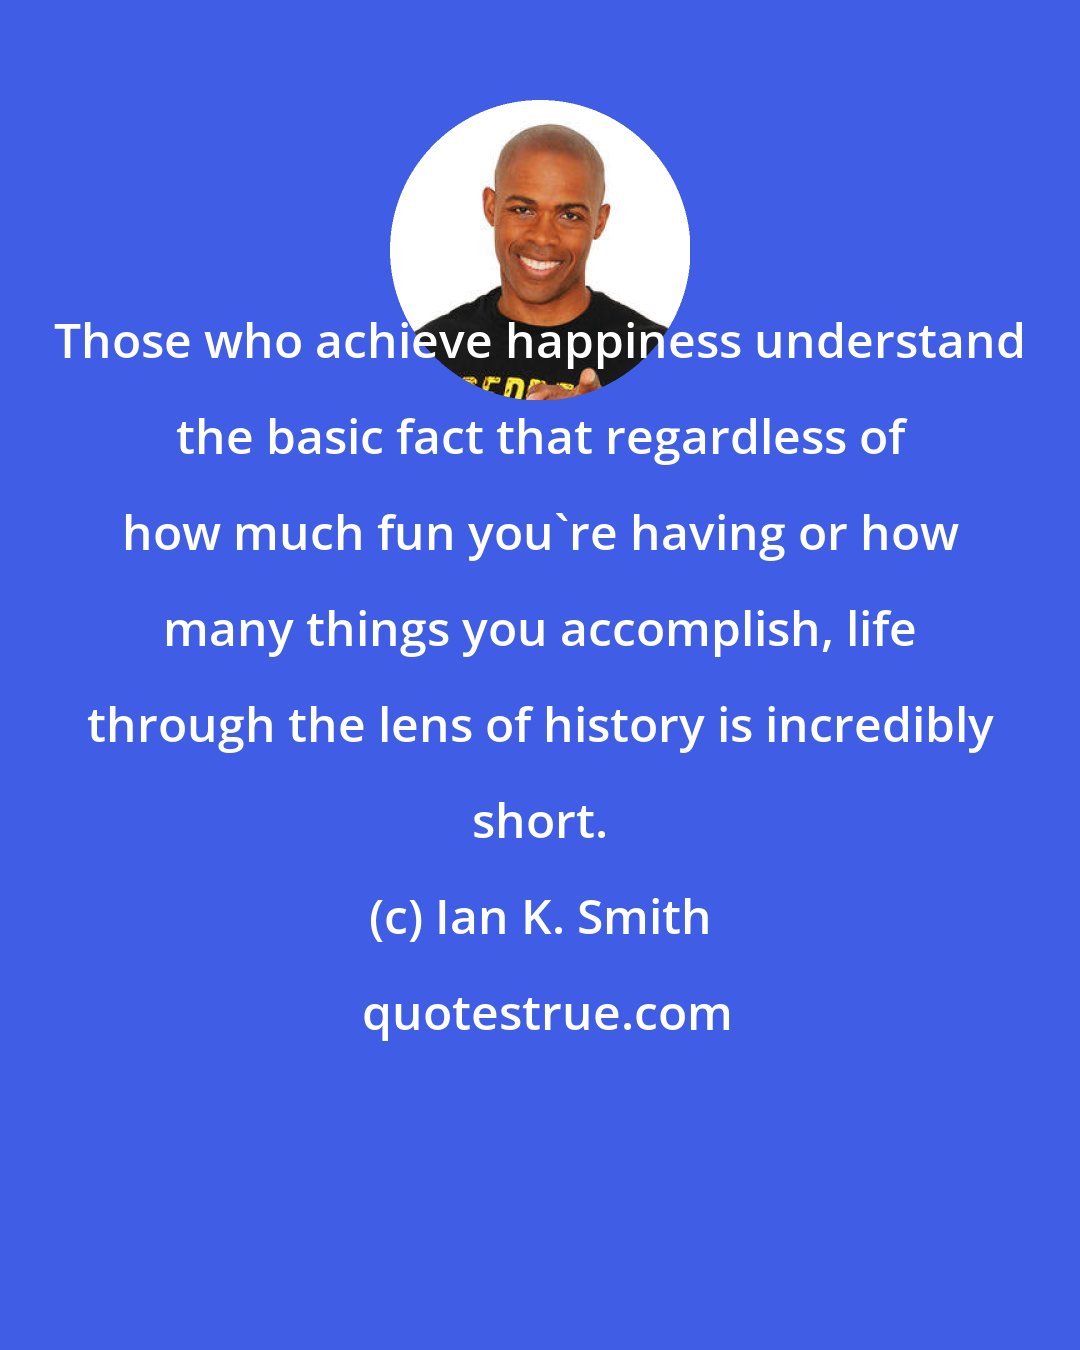 Ian K. Smith: Those who achieve happiness understand the basic fact that regardless of how much fun you're having or how many things you accomplish, life through the lens of history is incredibly short.